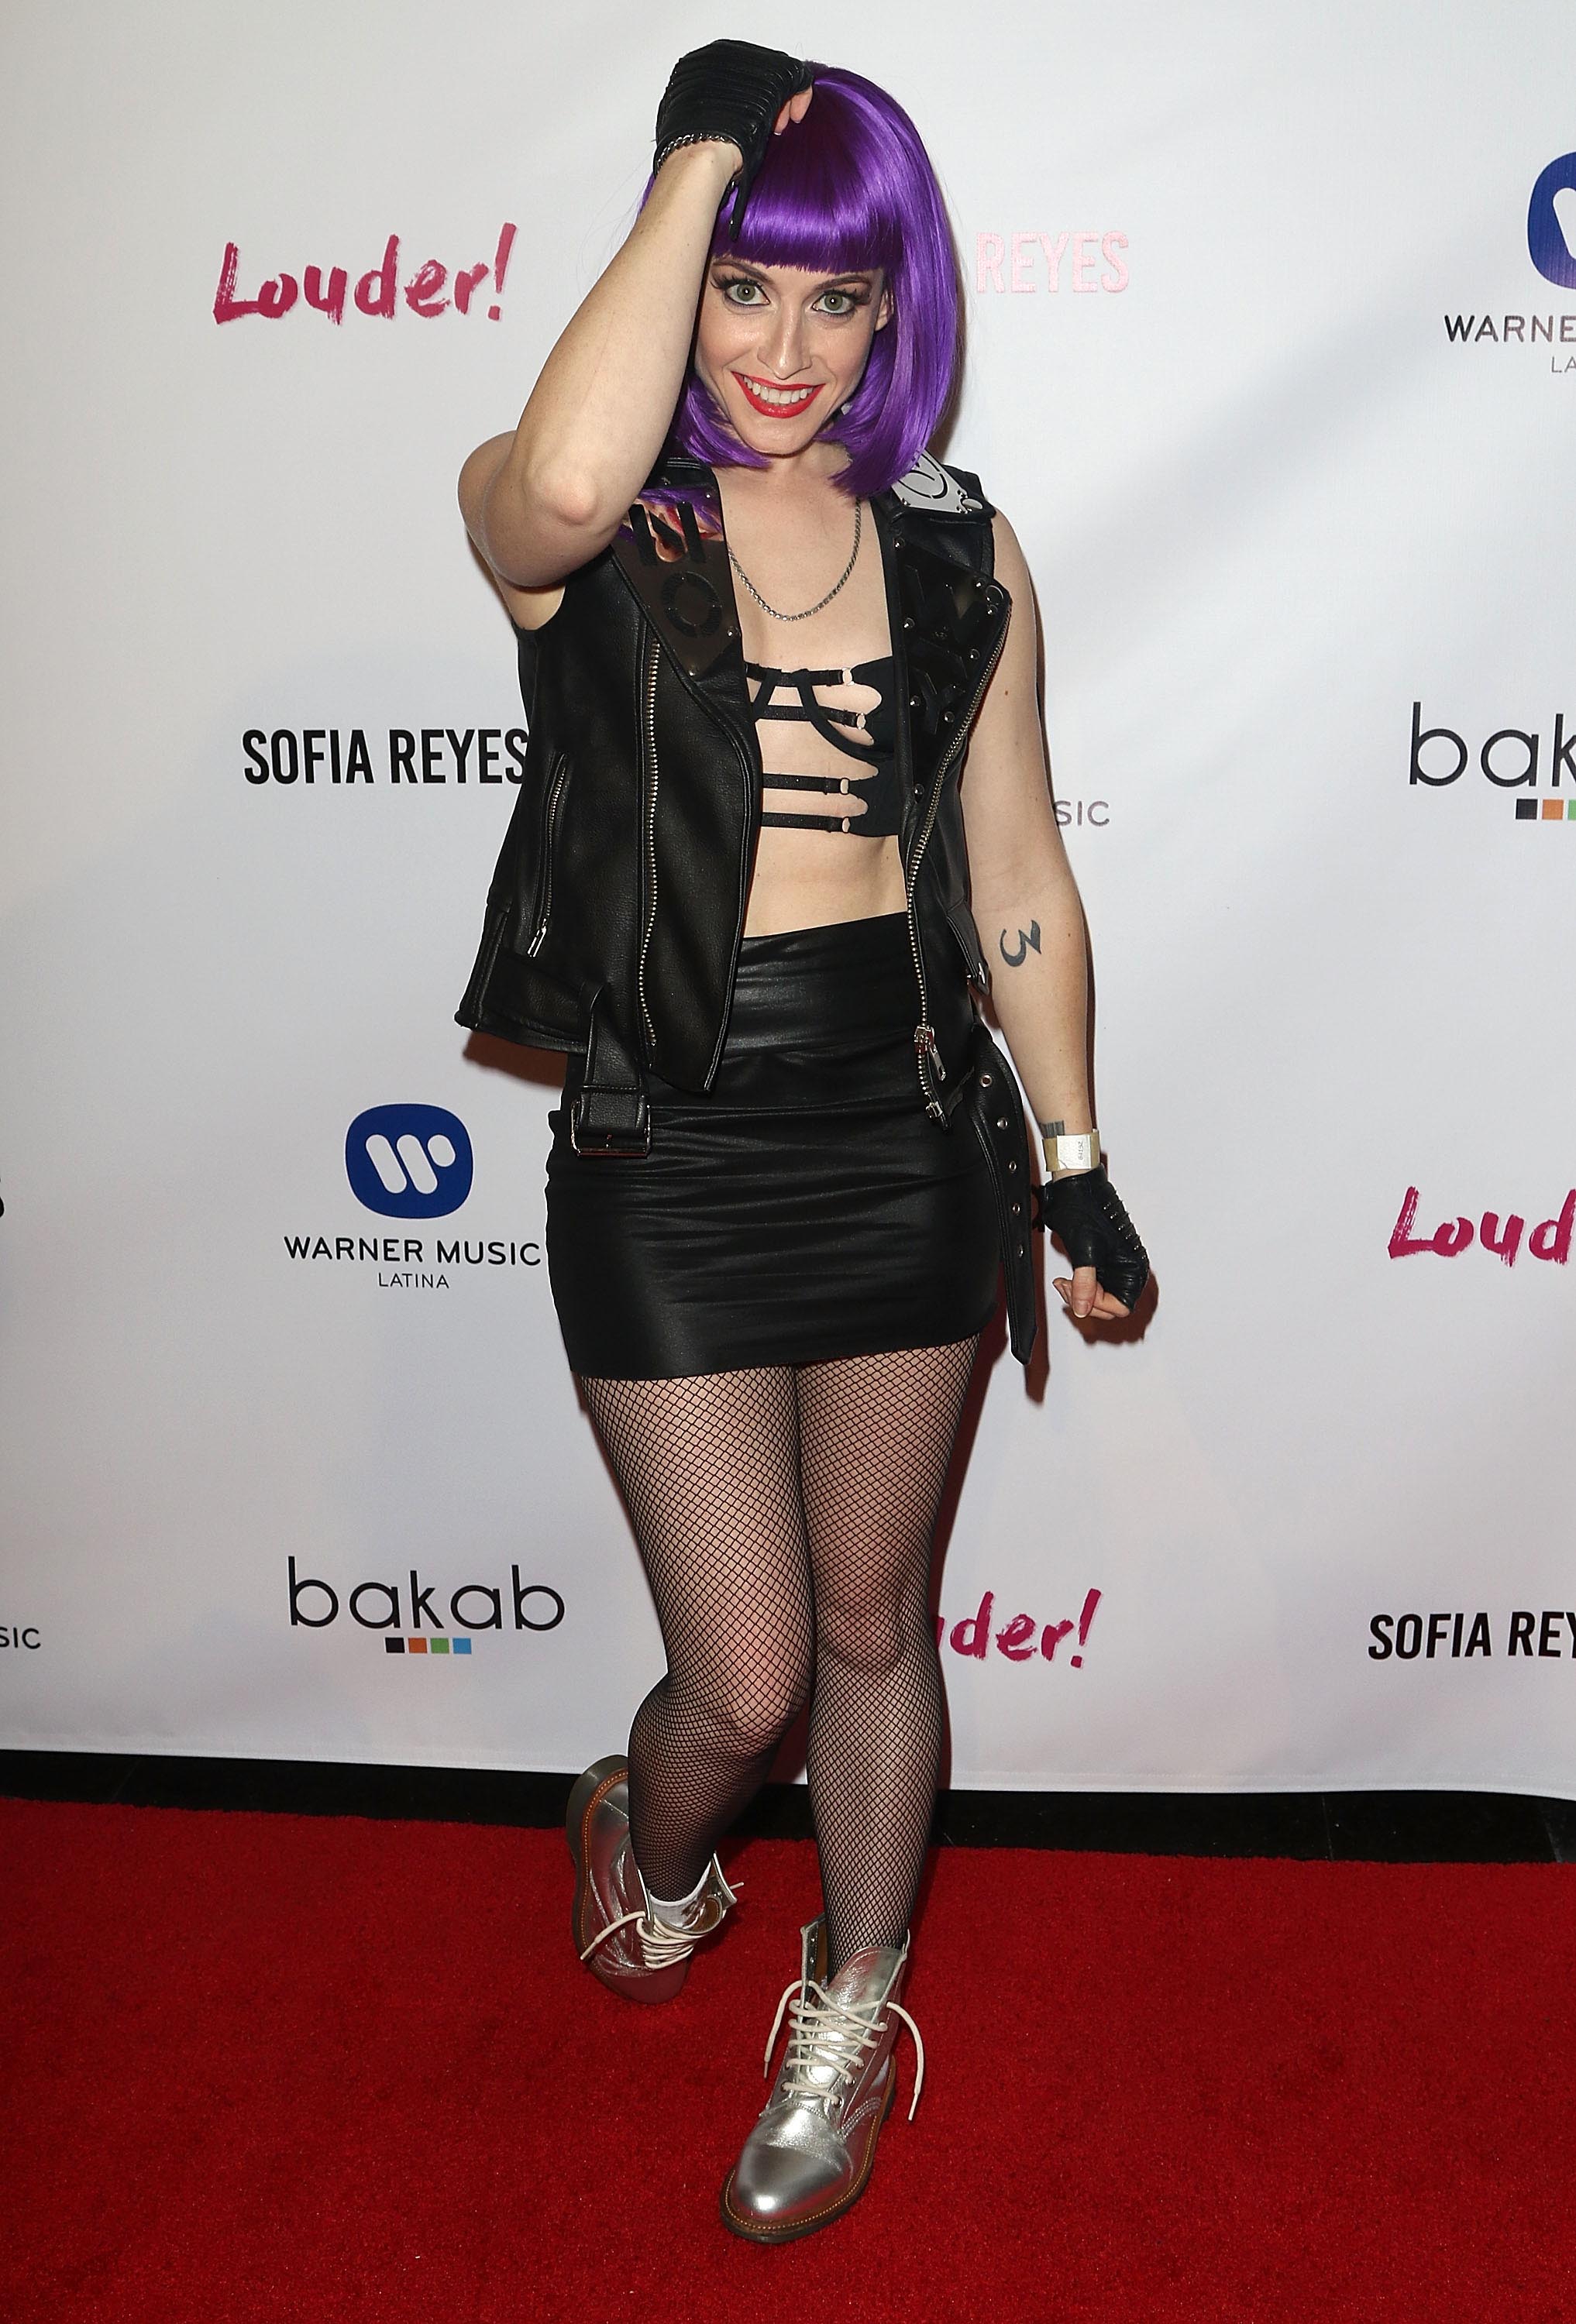 Heather Dawn Bright attends Sofia Reyes album release party